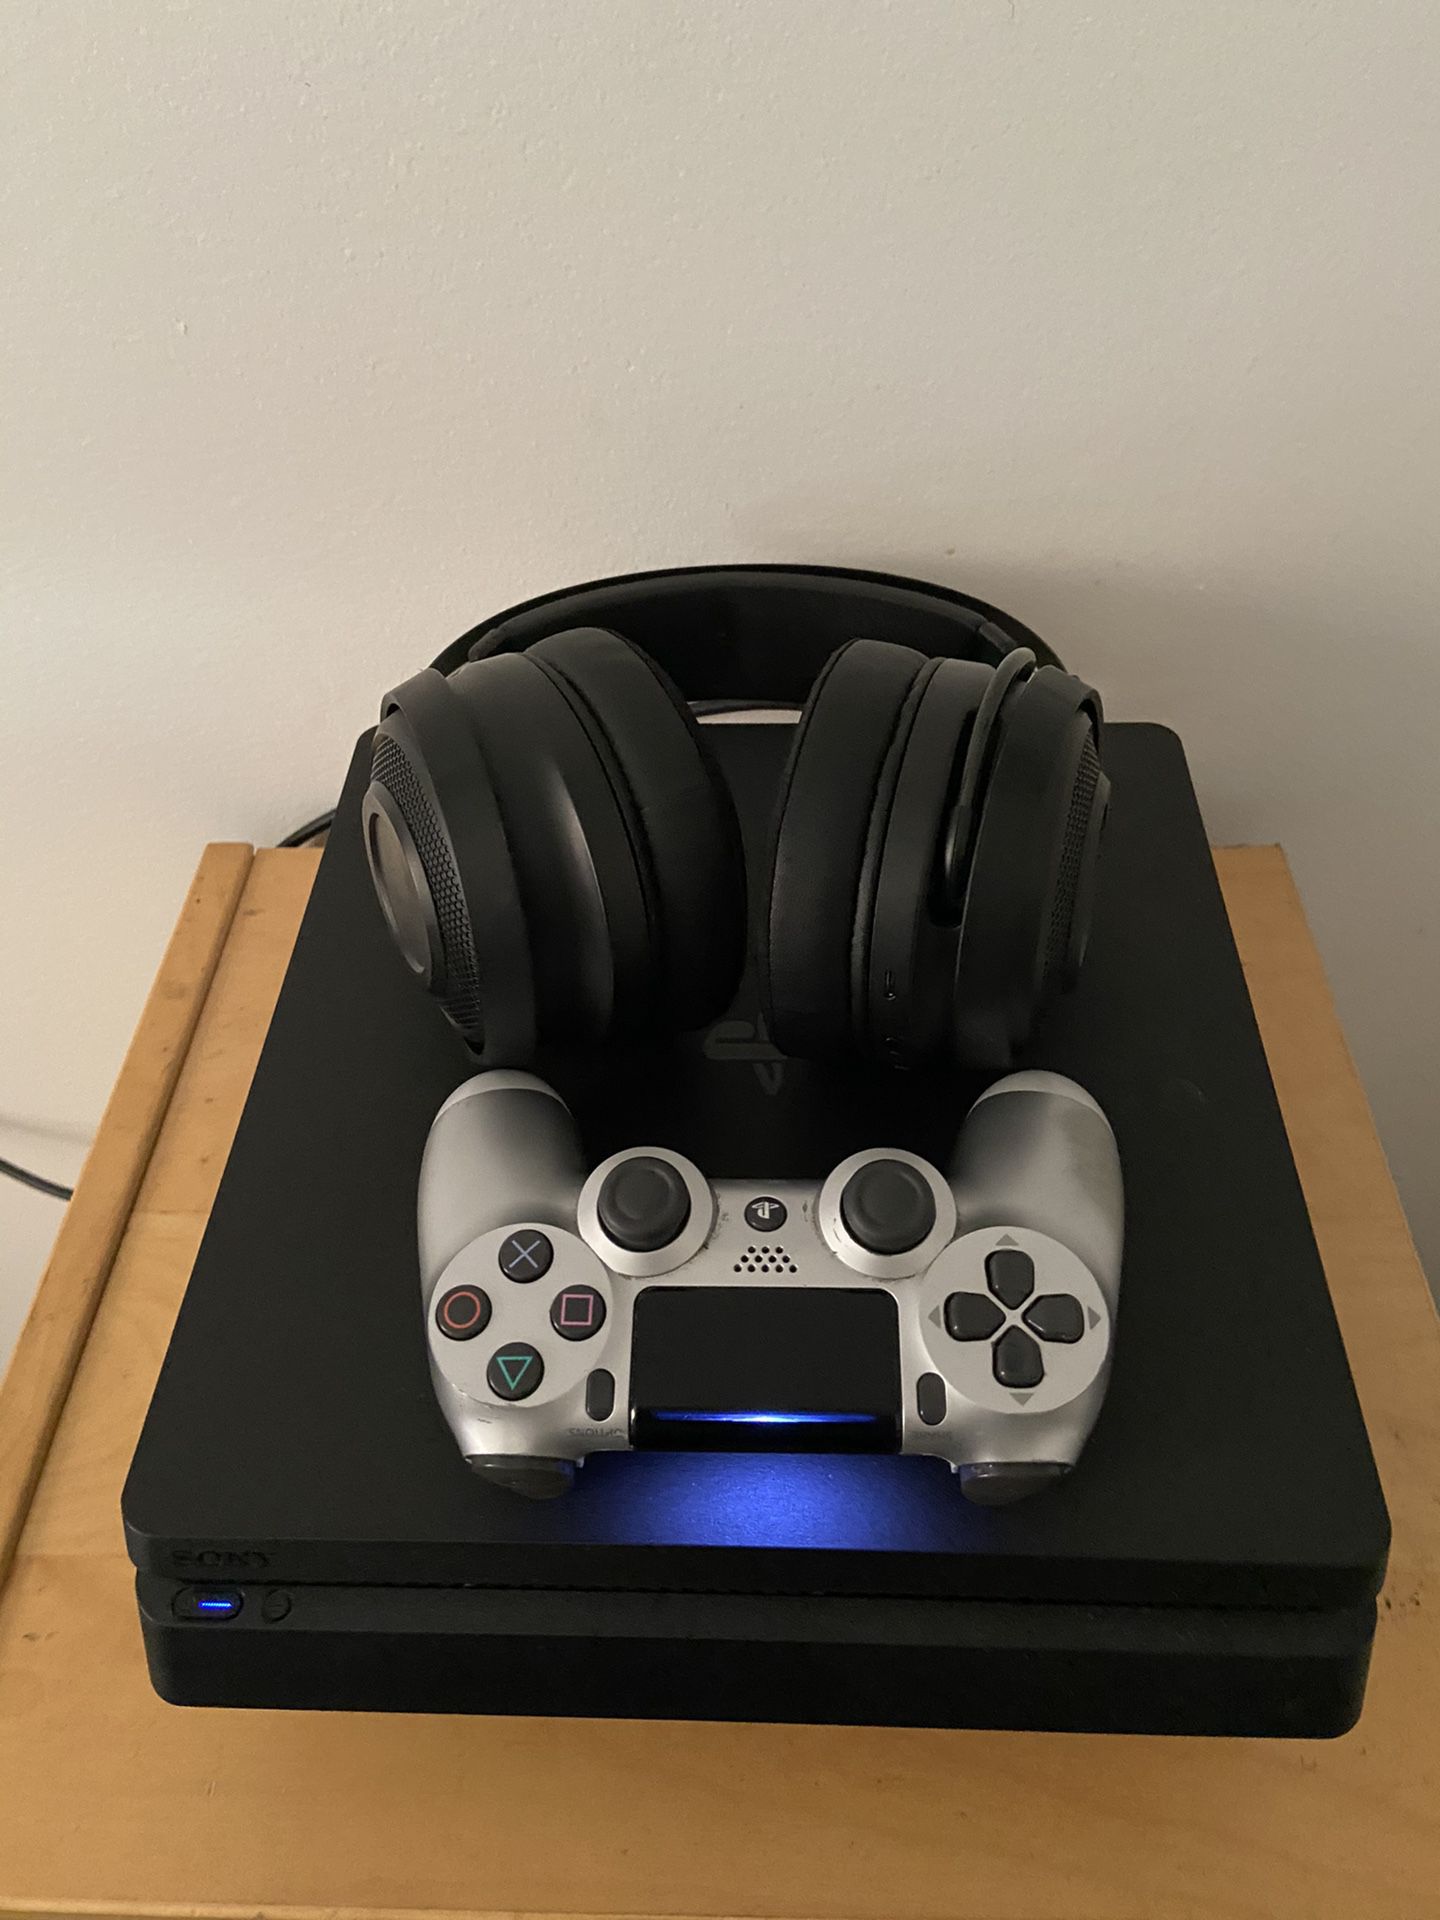 (SERIOUS BUYERS ONLY) PS4 Slim+ Controller and charger cord + Bluetooth headphones